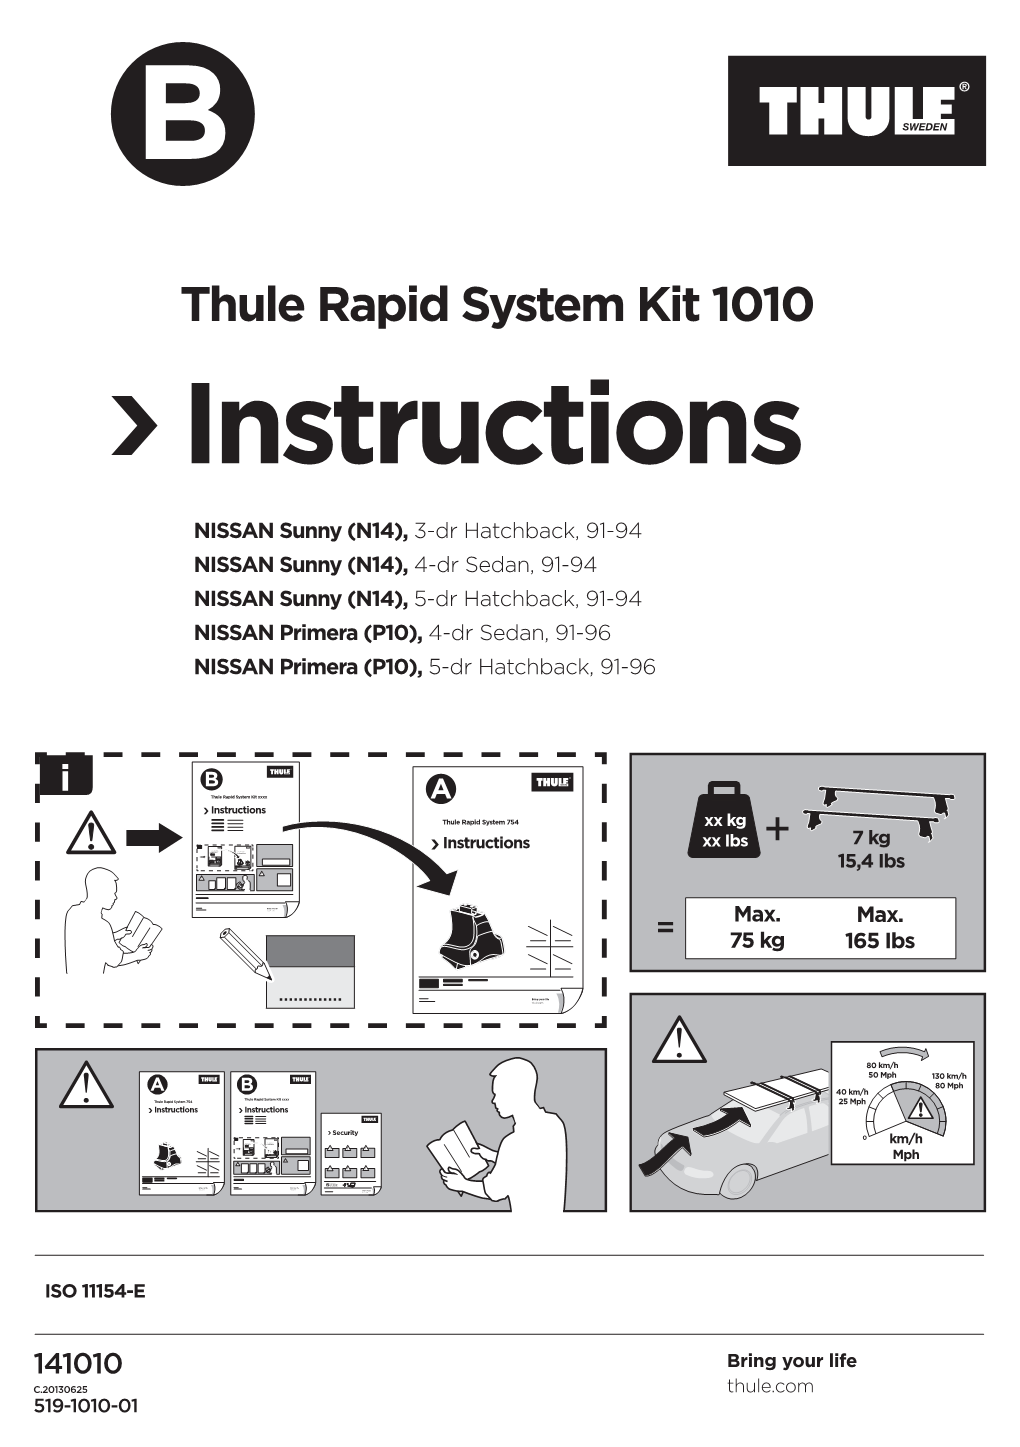 Thule Rapid System Kit 1010 Instructions